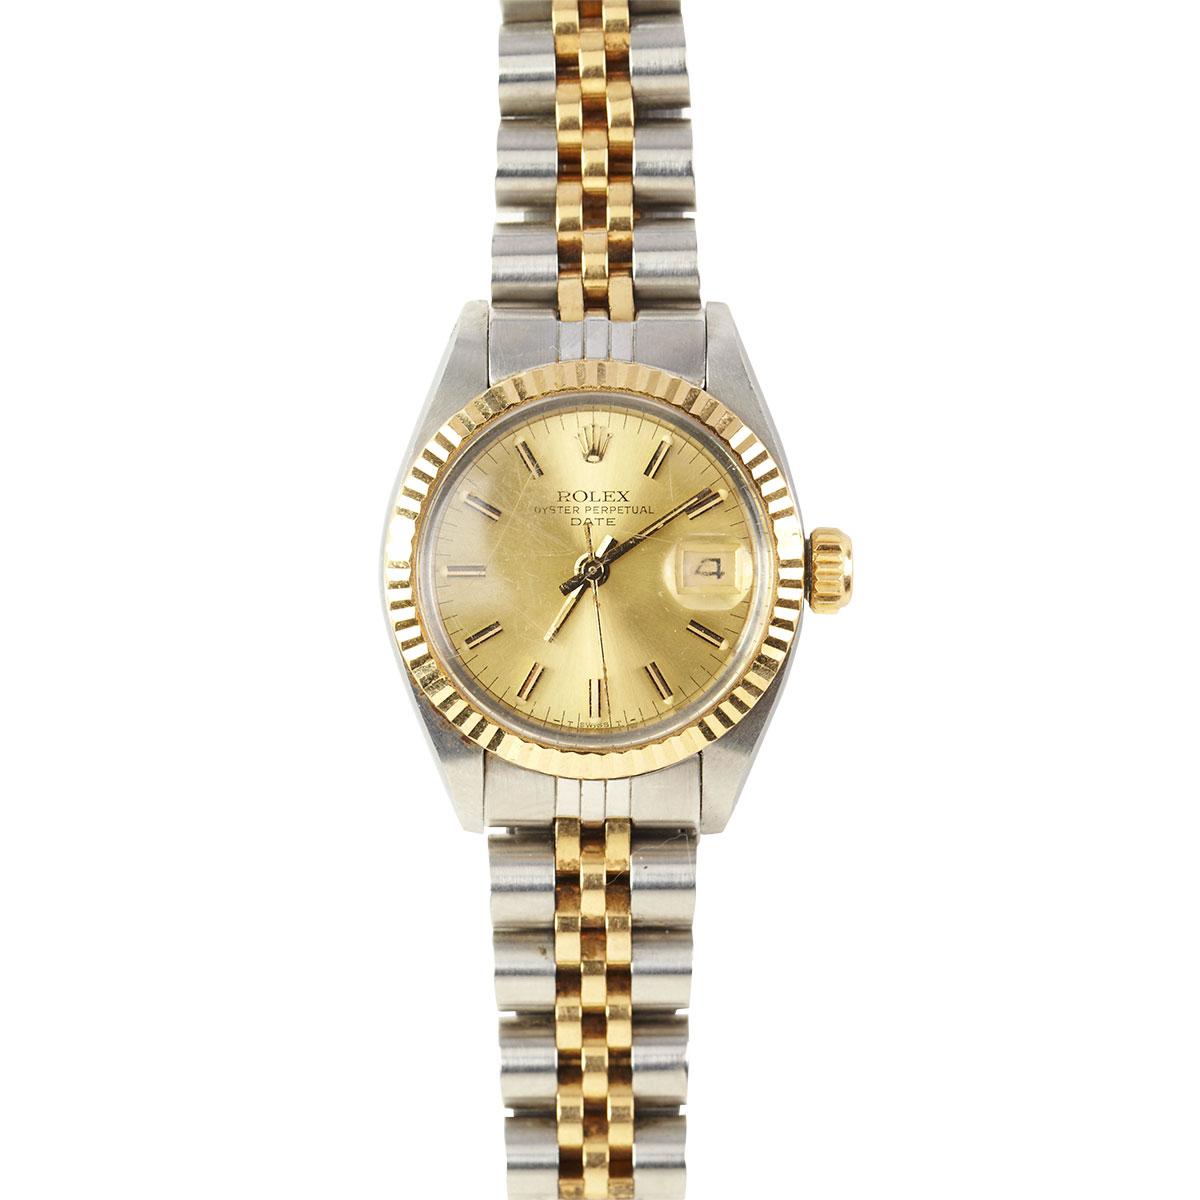 Lady’s Rolex Oyster Perpetual Date Wristwatch